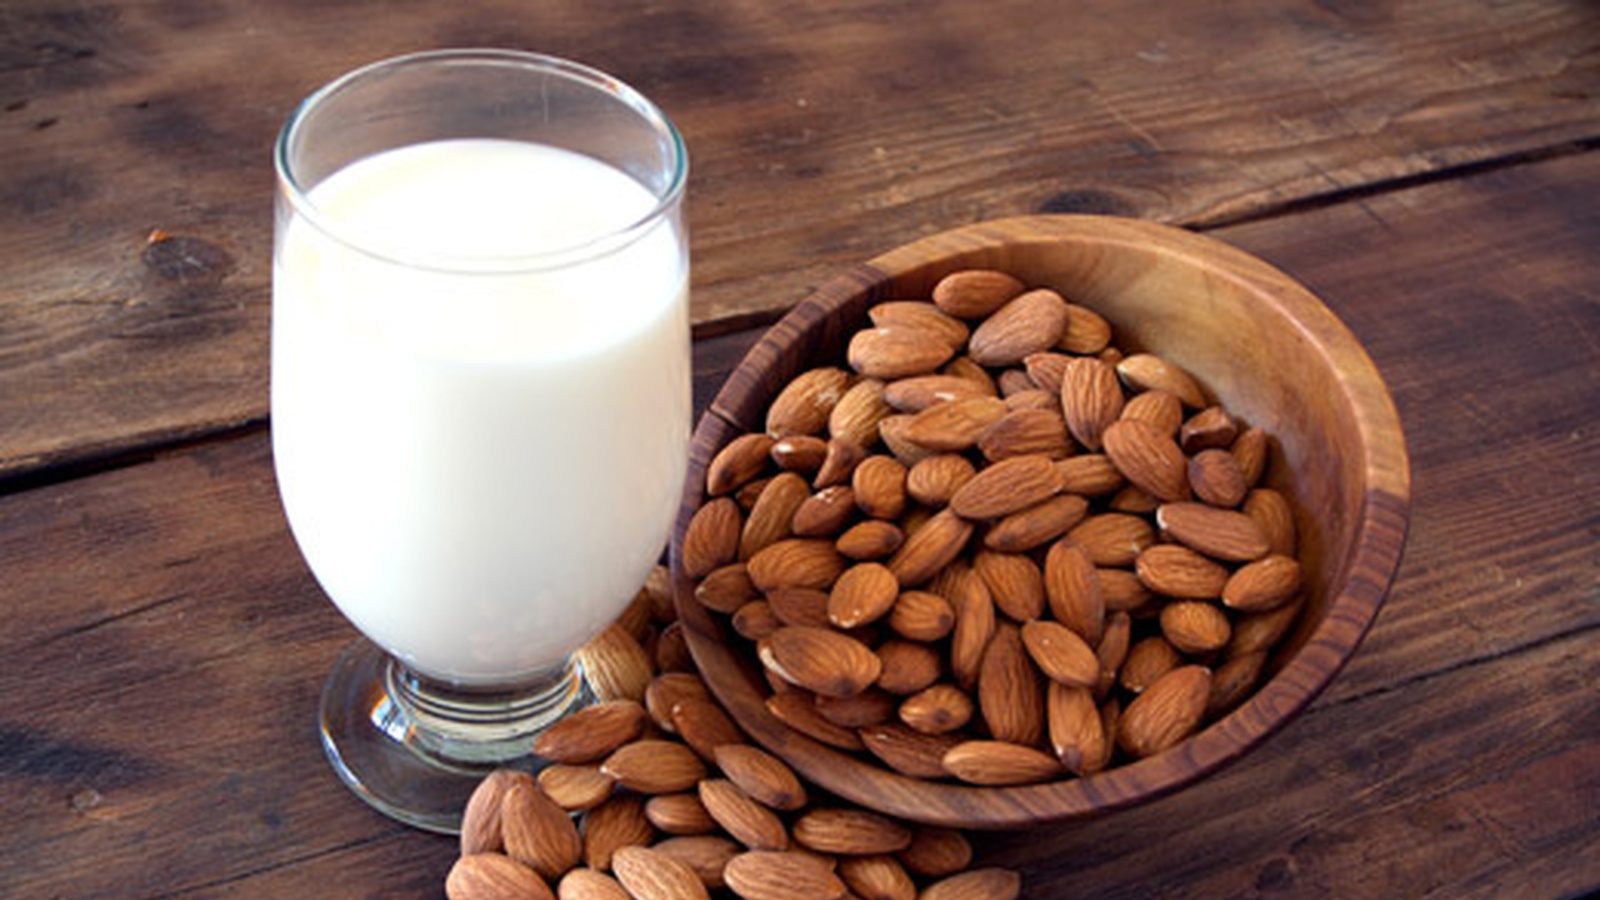 How to Make Nutrient-Rich, Additive-Free Nut Milks In Under 5 Minutes